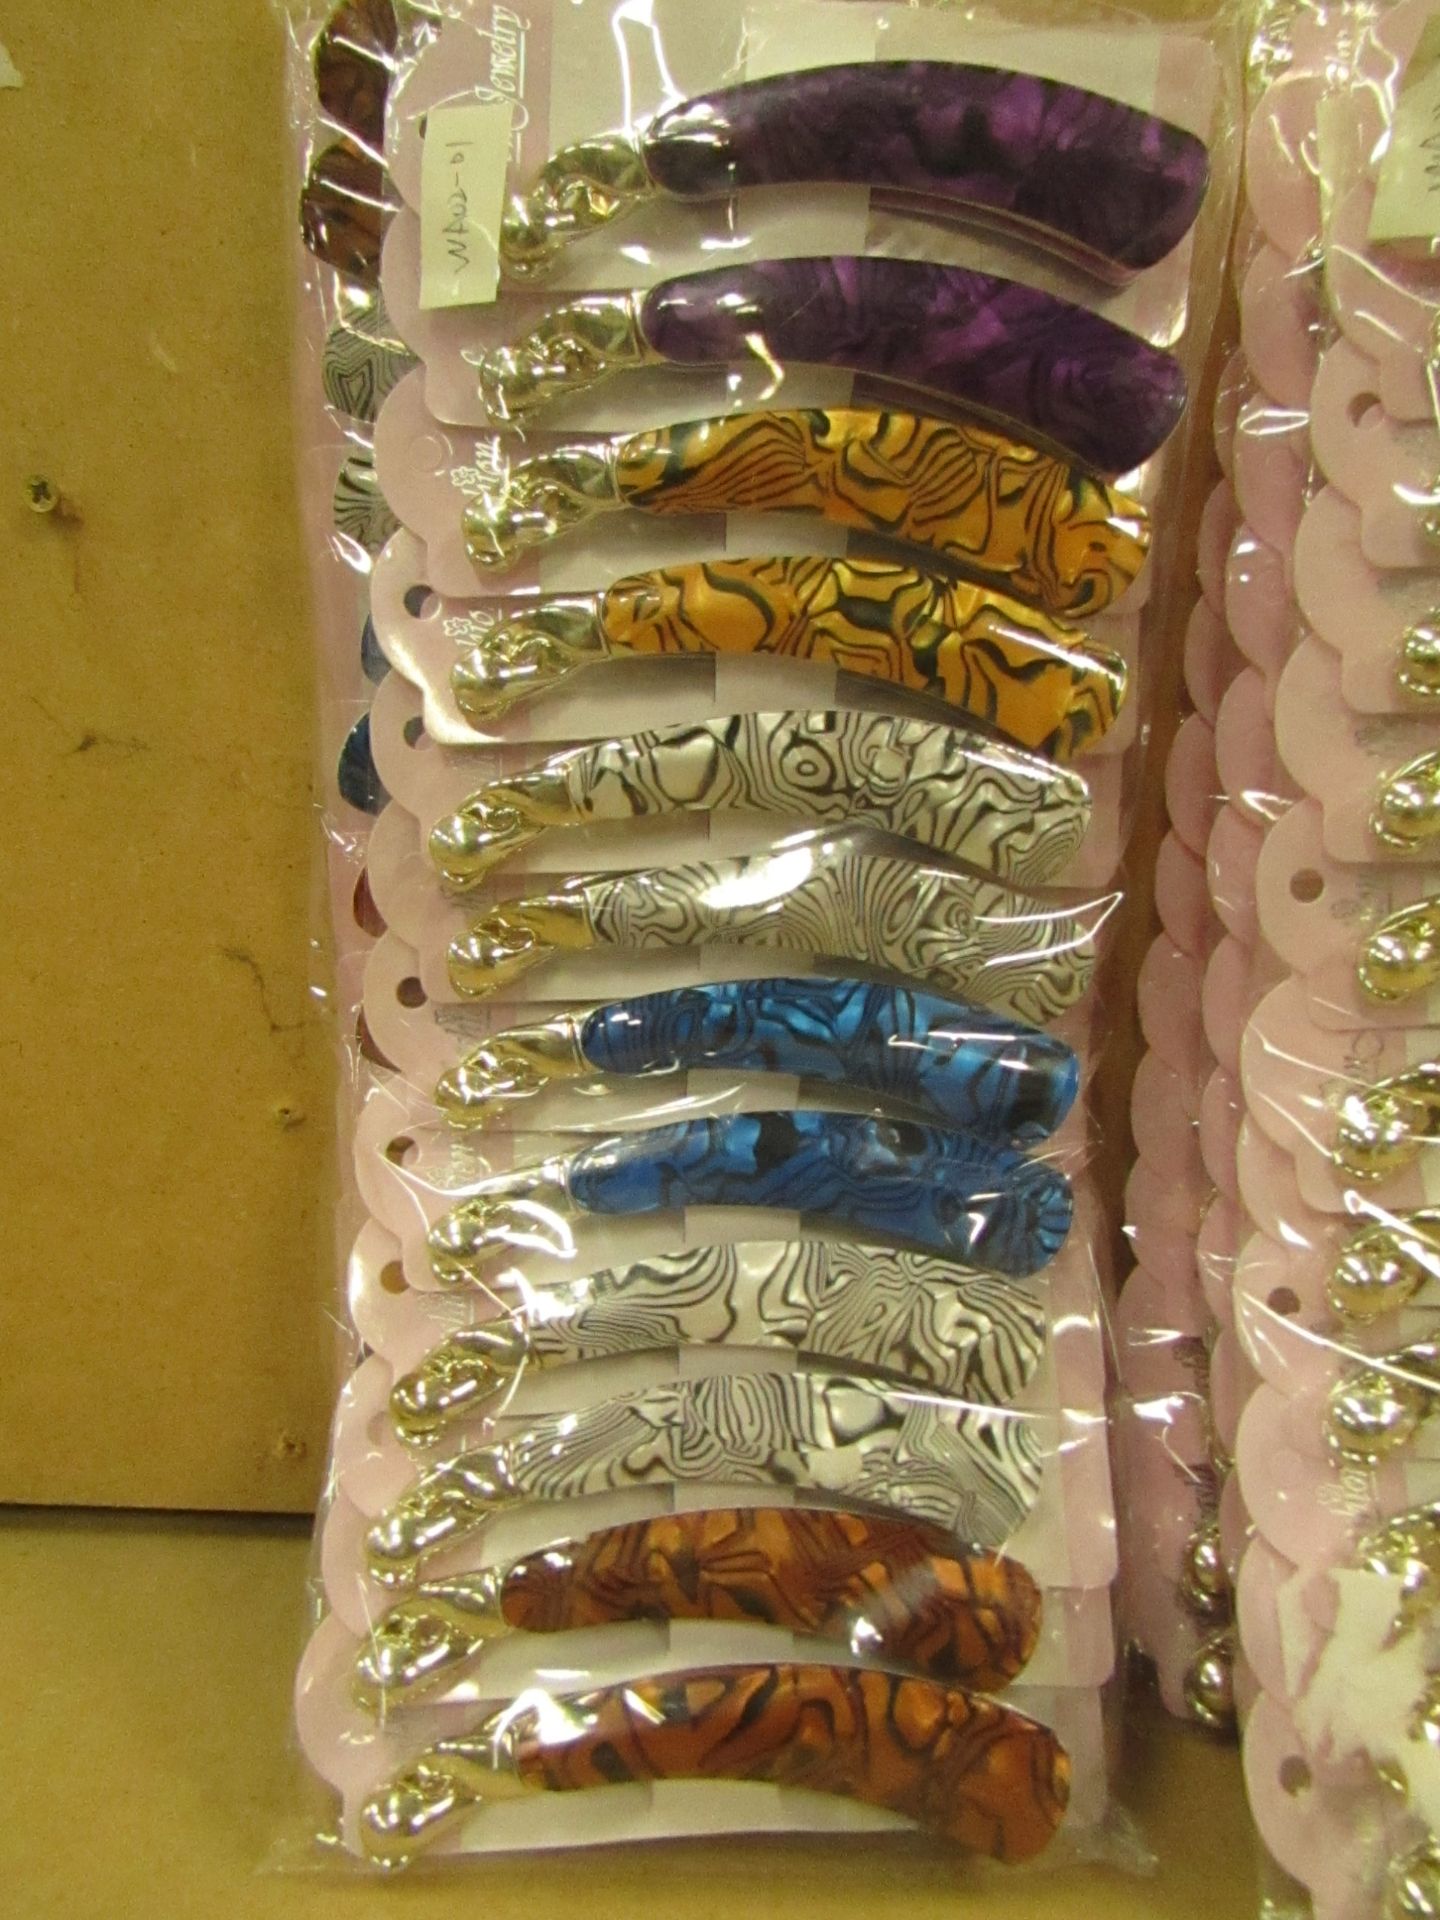 12 x  Decorative Hair Banana Hair Claws RRP £3.50 each @ Claire's Accessories new see image for